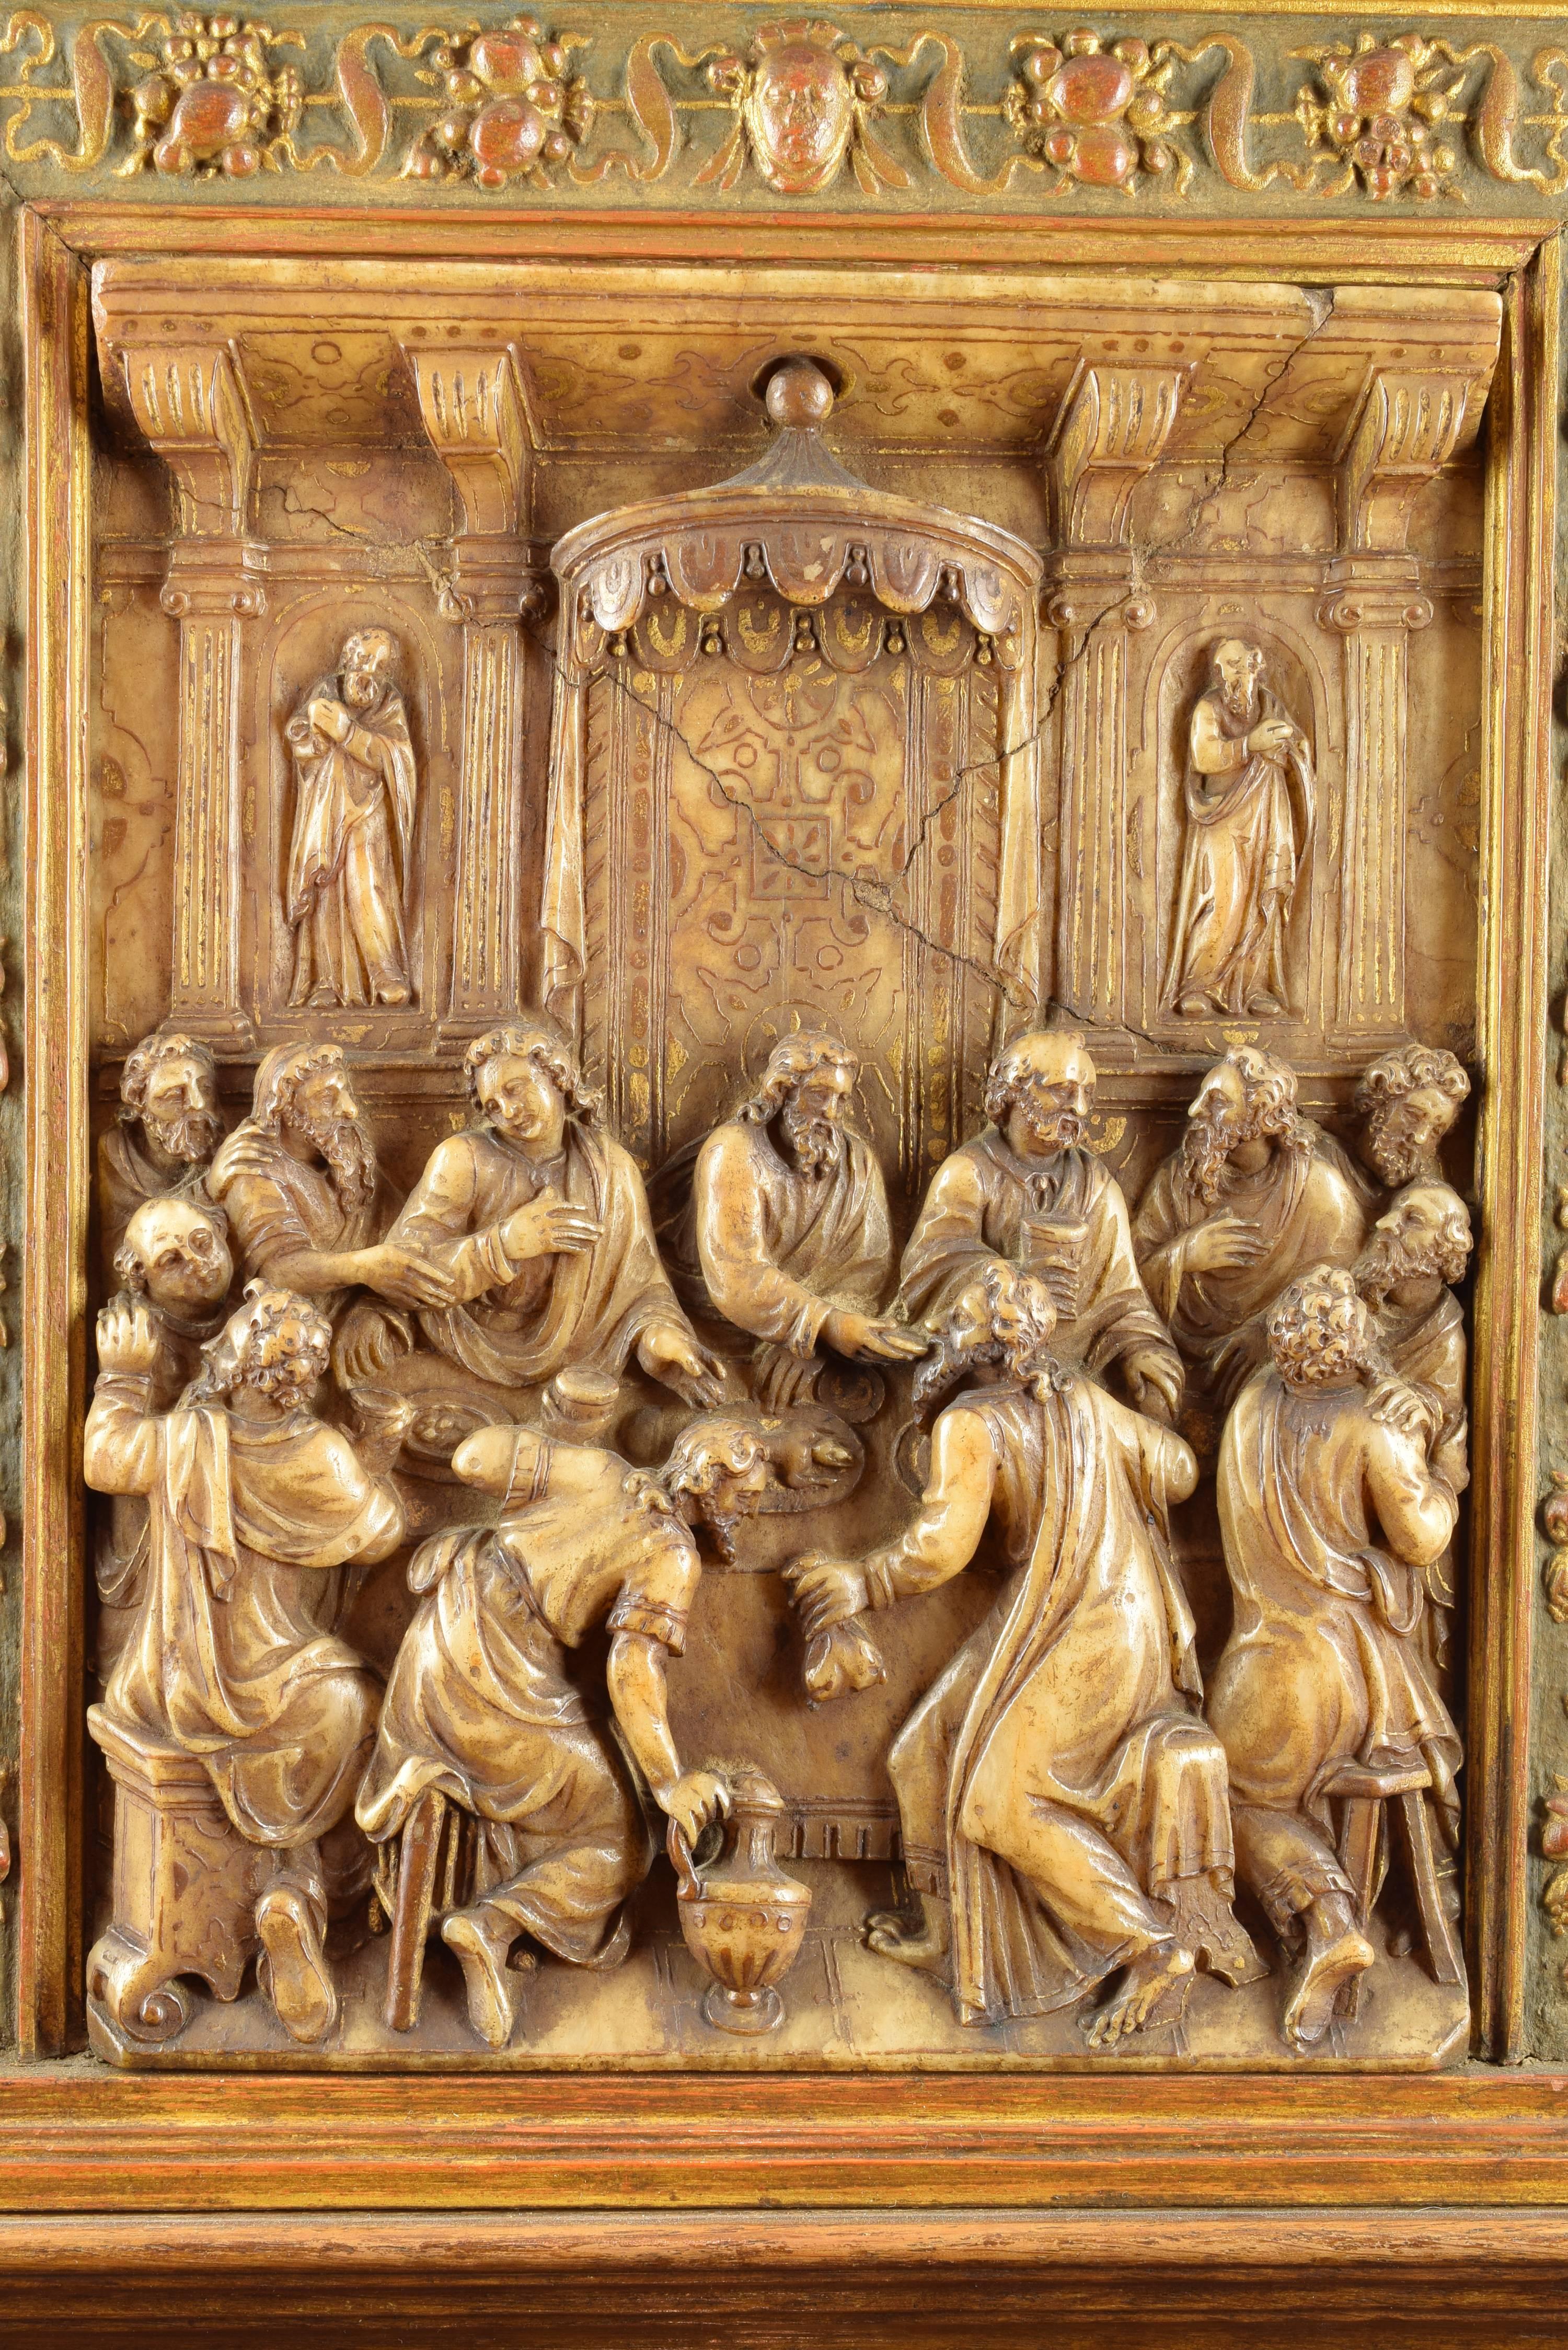 Carved Domestic Altar, Alabaster and Wood, Possibly Malines ‘Mechelen’ Mid-16th Century